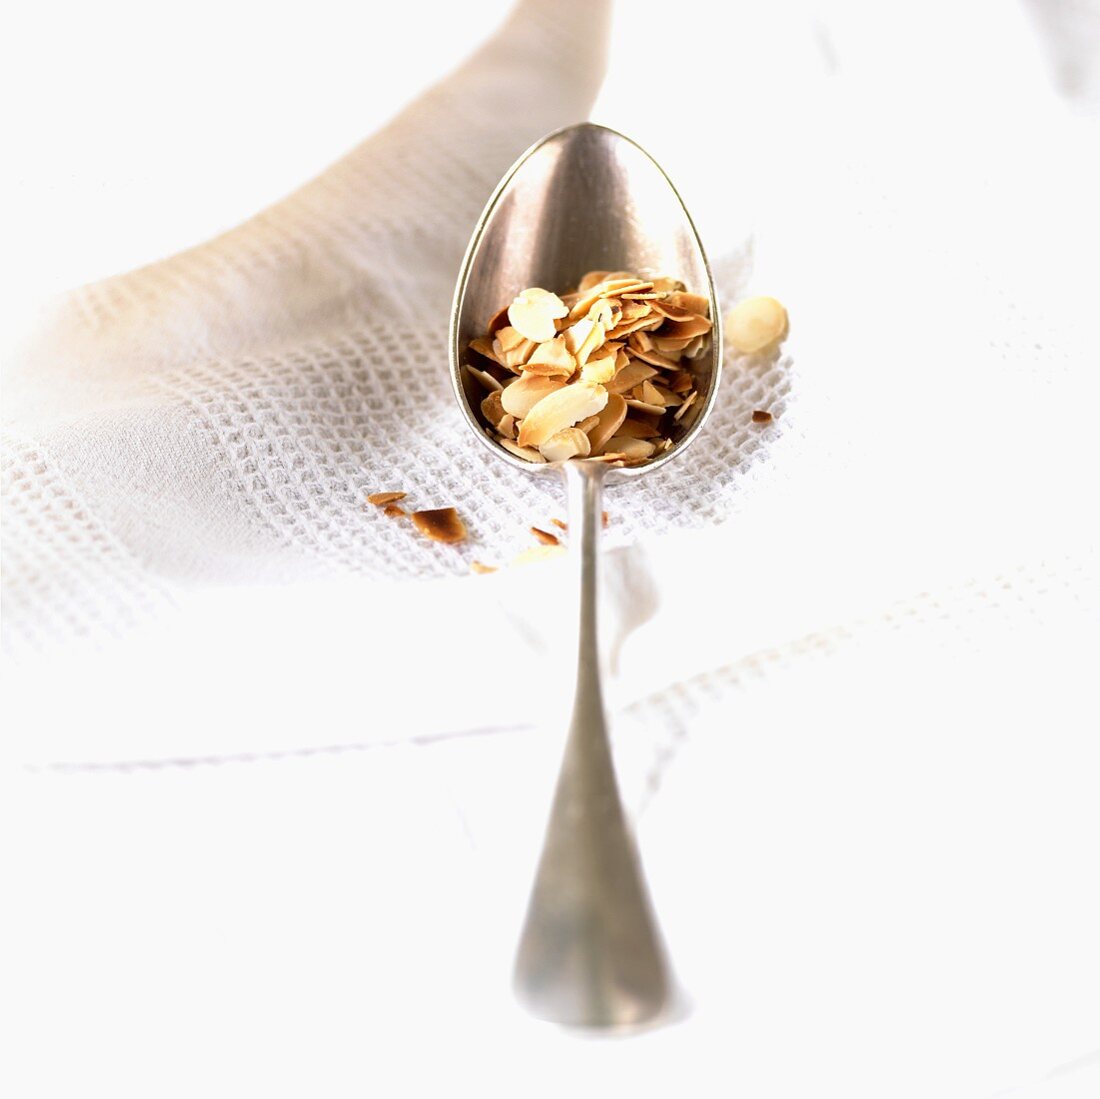 Toasted flaked almonds on a spoon